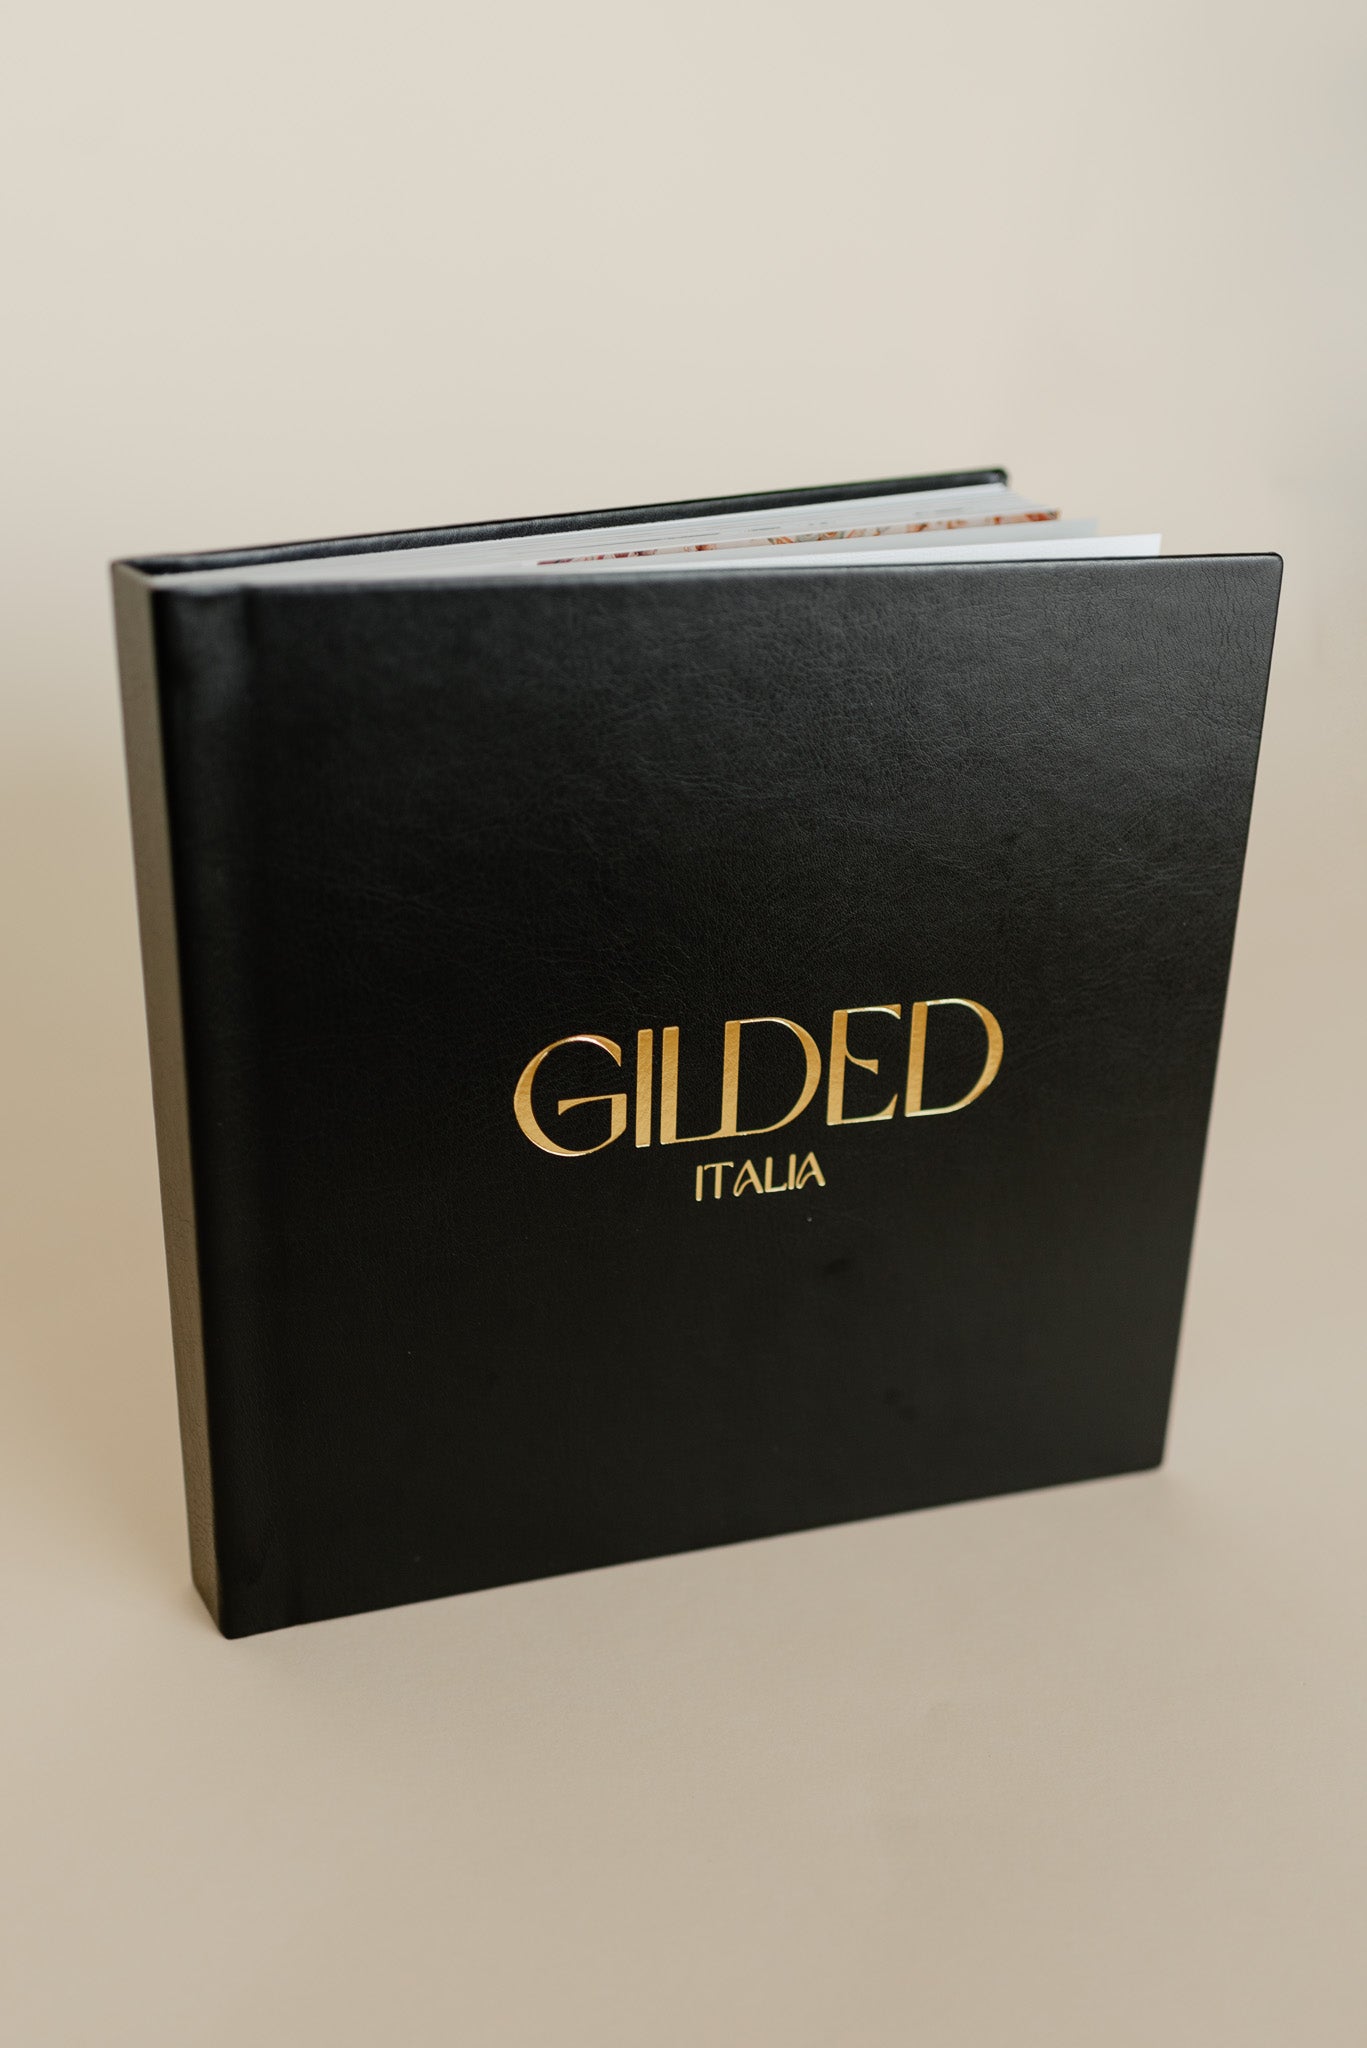 Gilded Italia: Timeless Moments from Venice to Rome